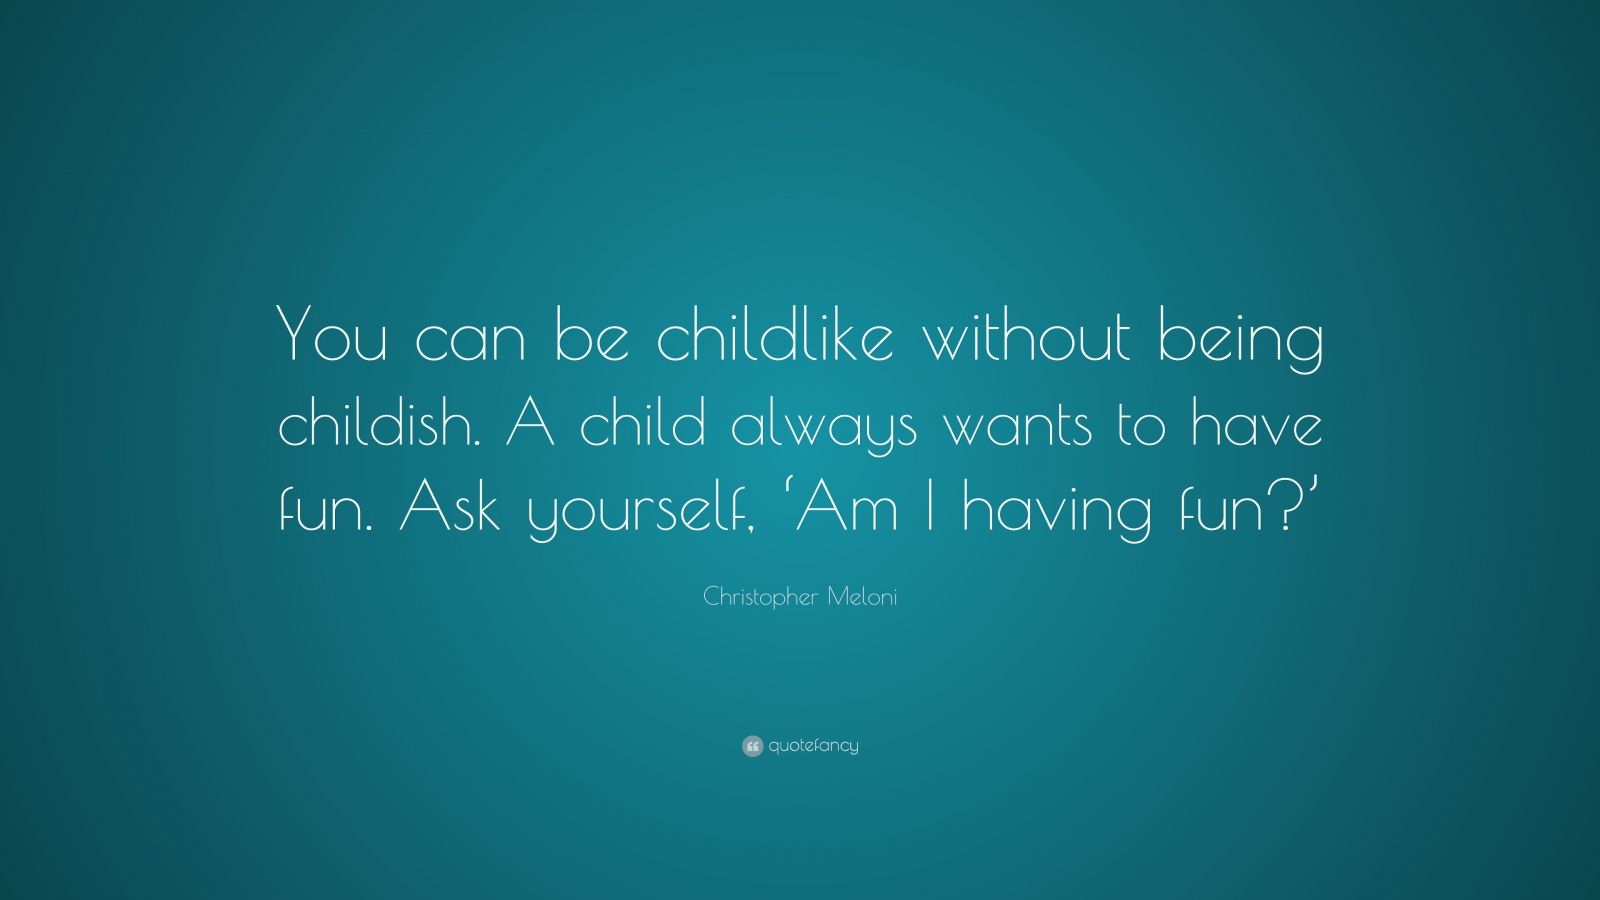 Christopher Meloni Quote: “You can be childlike without being childish ...